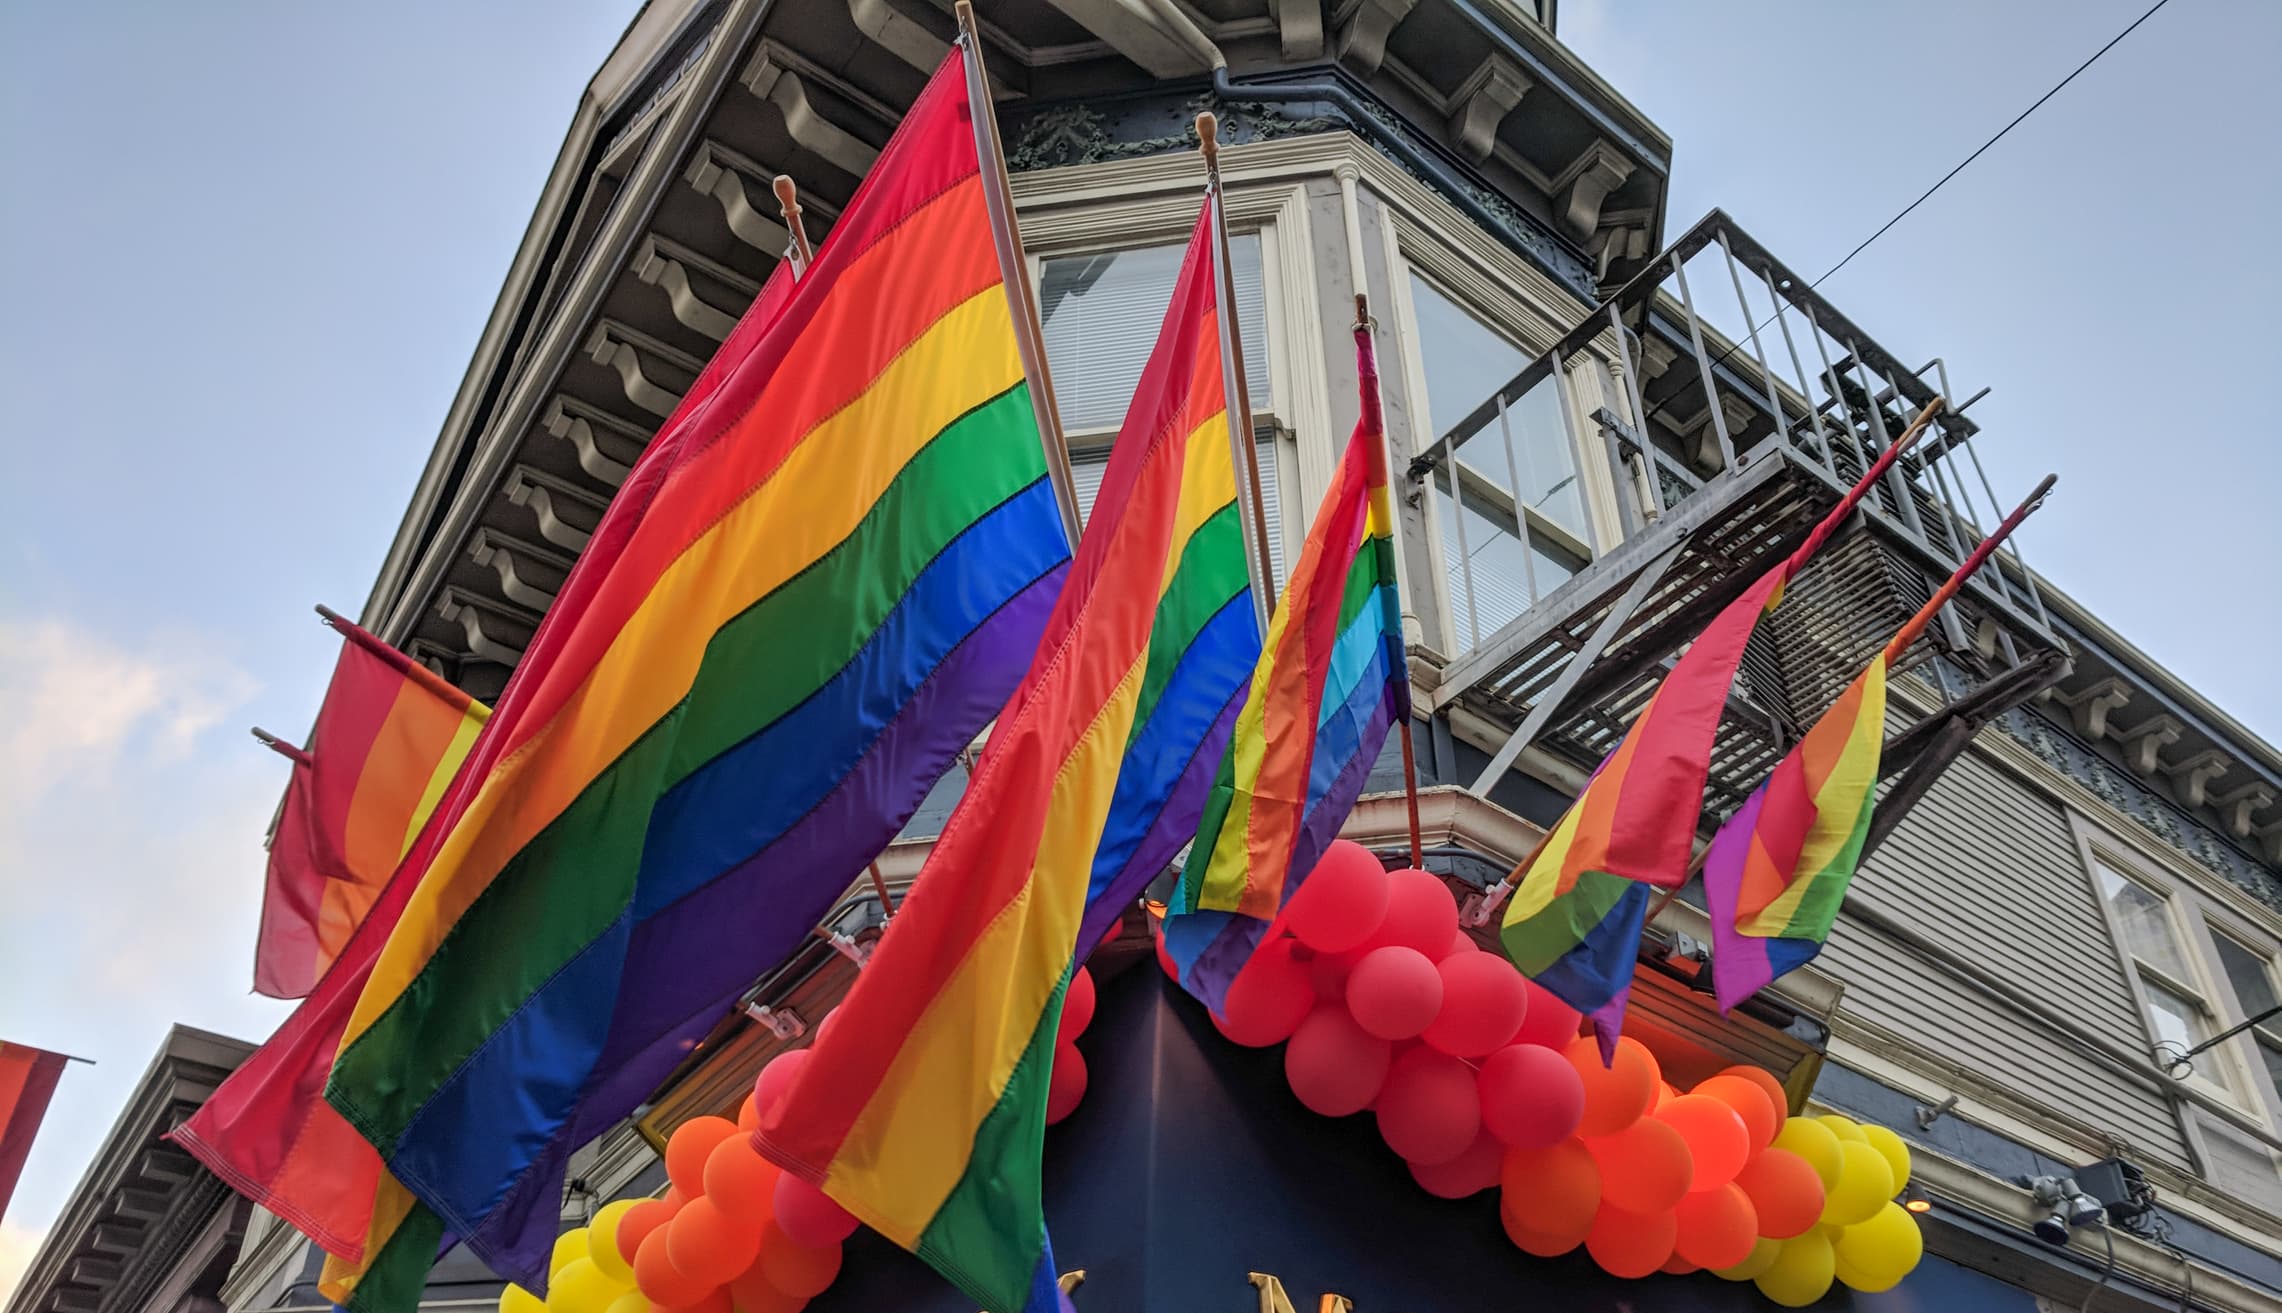 Rainbow pride flags decorate a Victorian-style building in San Francisco's Castro District